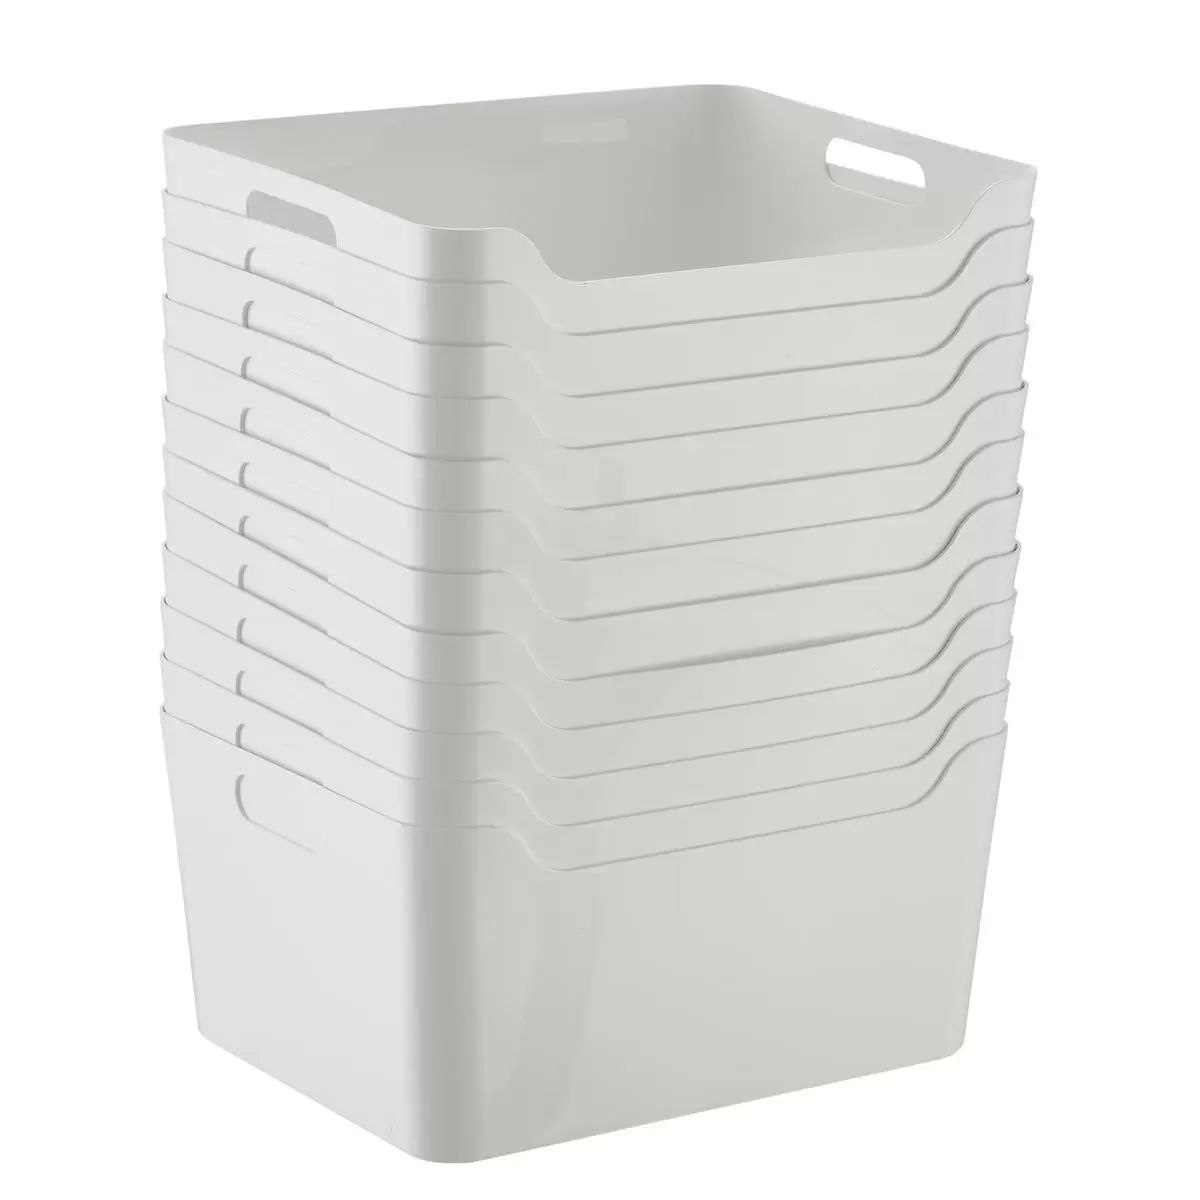 Large Plastic Storage Bin w/ Handles White | The Container Store